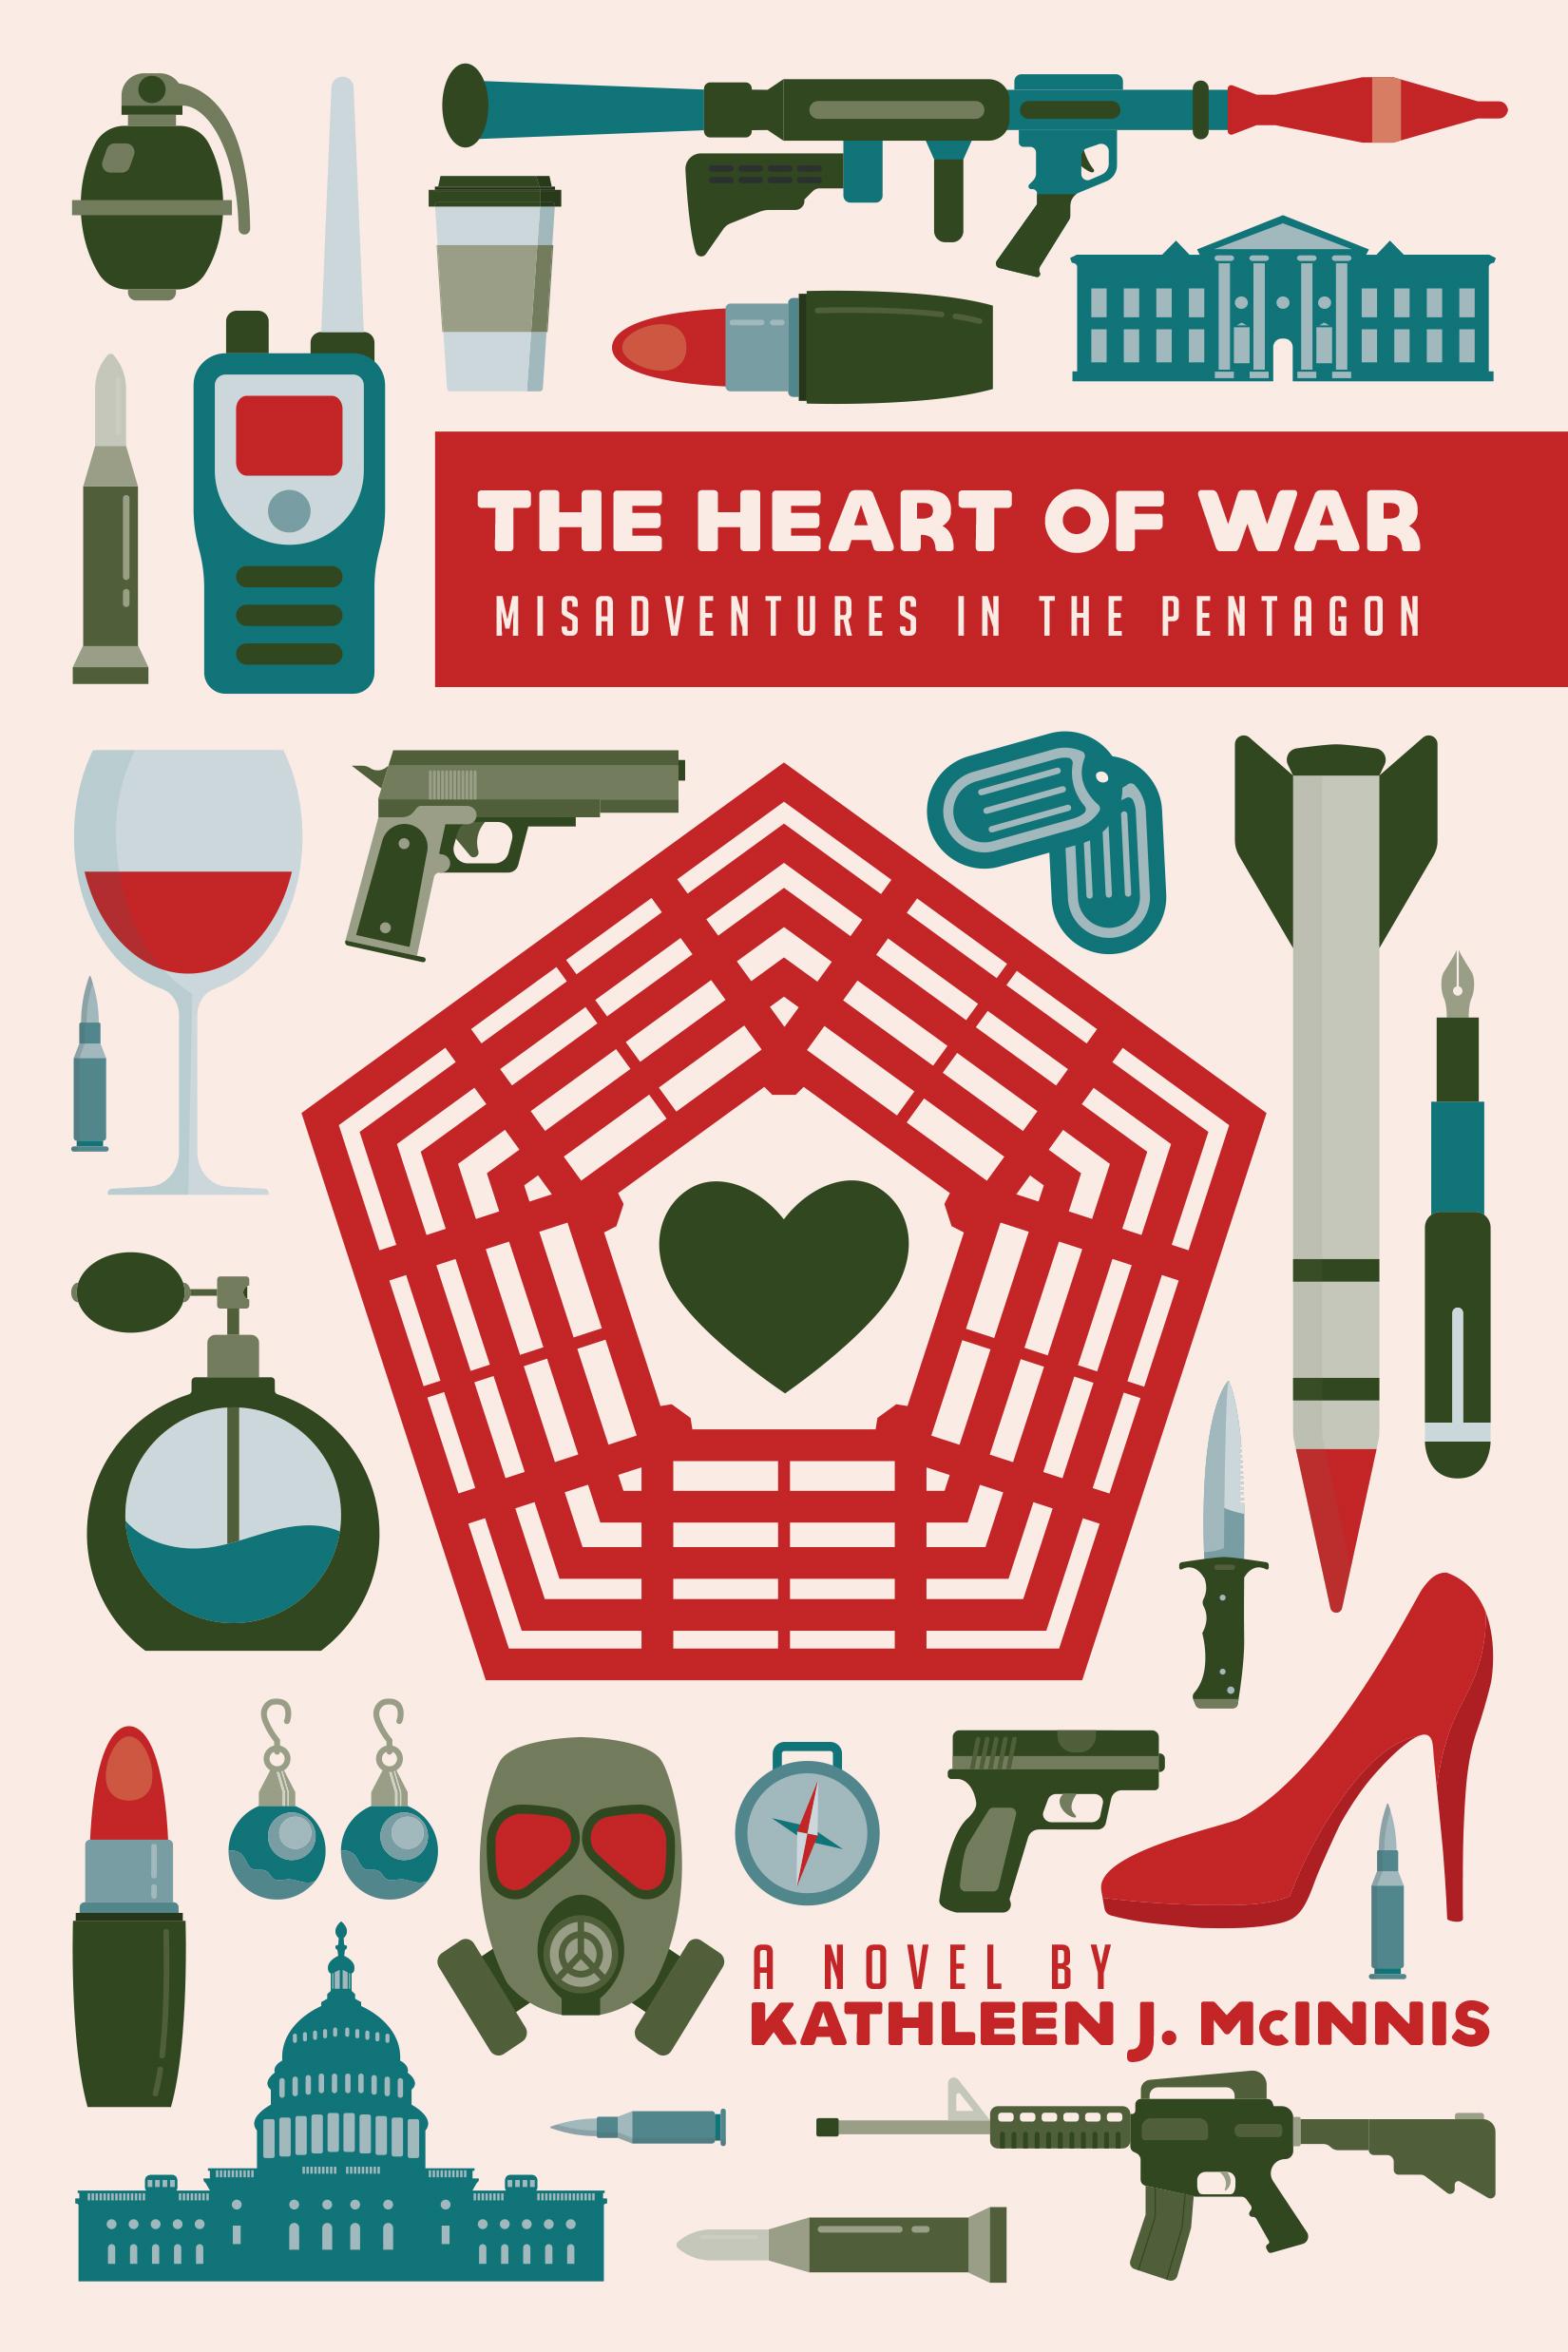 Green Red Pentagon Logo - BOOK LAUNCH! author Kathleen McInnis and THE HEART OF WAR ...